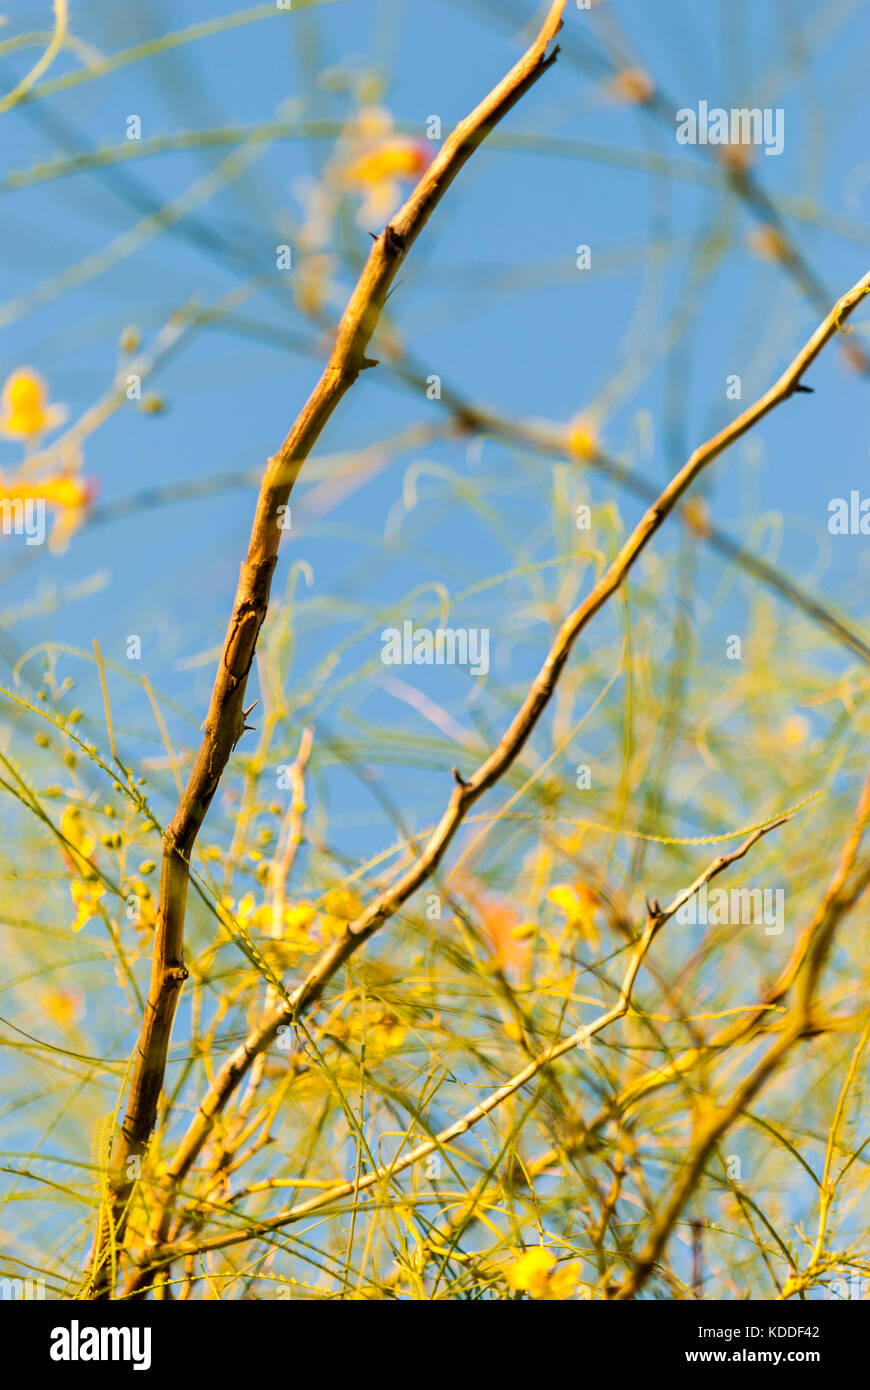 Desert Museum Palo Verde tree branches with flowers and blue sky background close-up Stock Photo